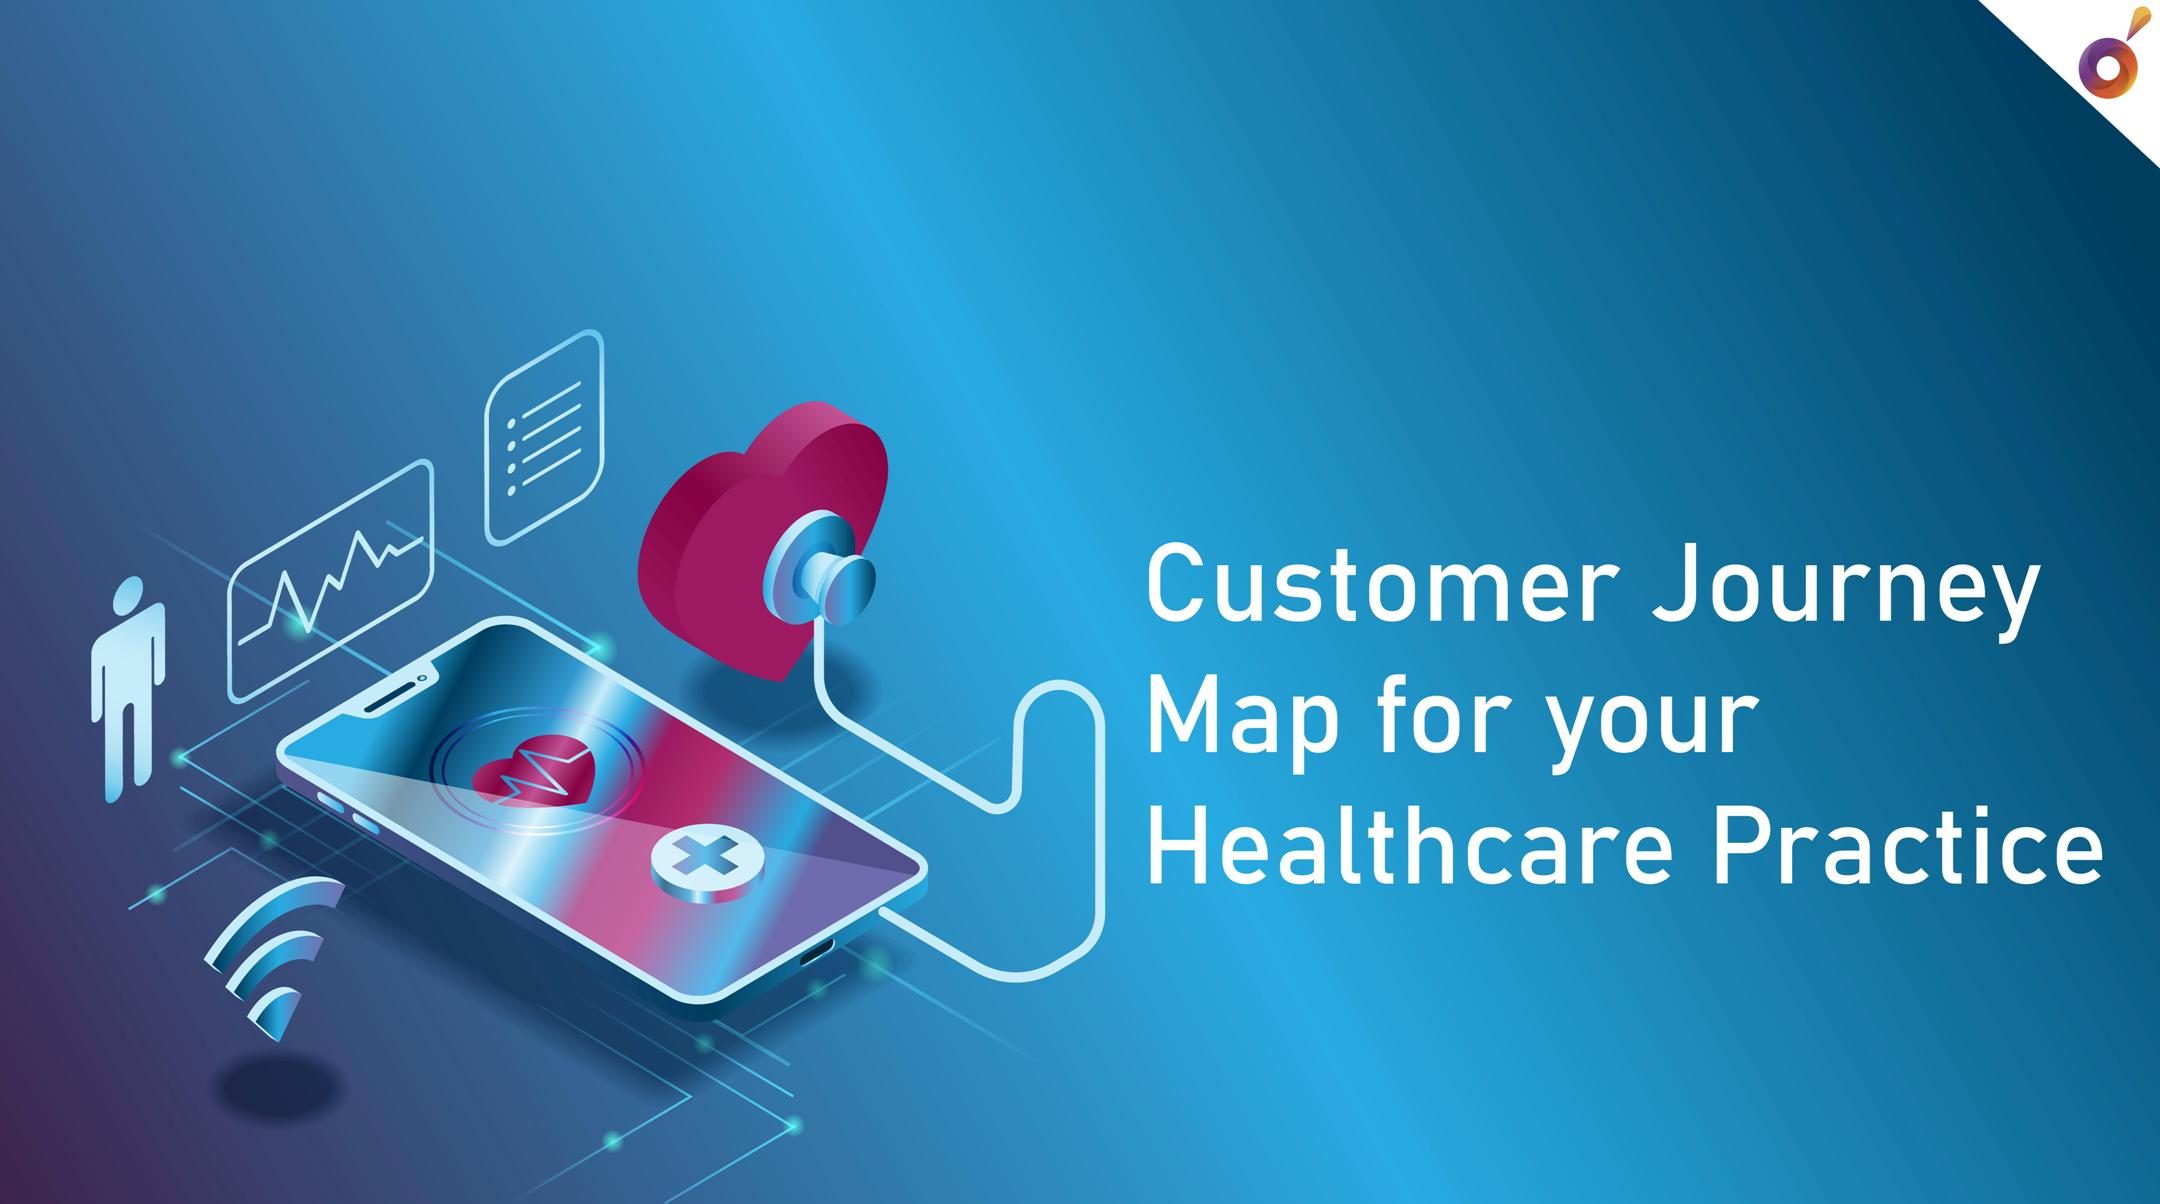 How to Create a Customer Journey Map for Your Healthcare Practice